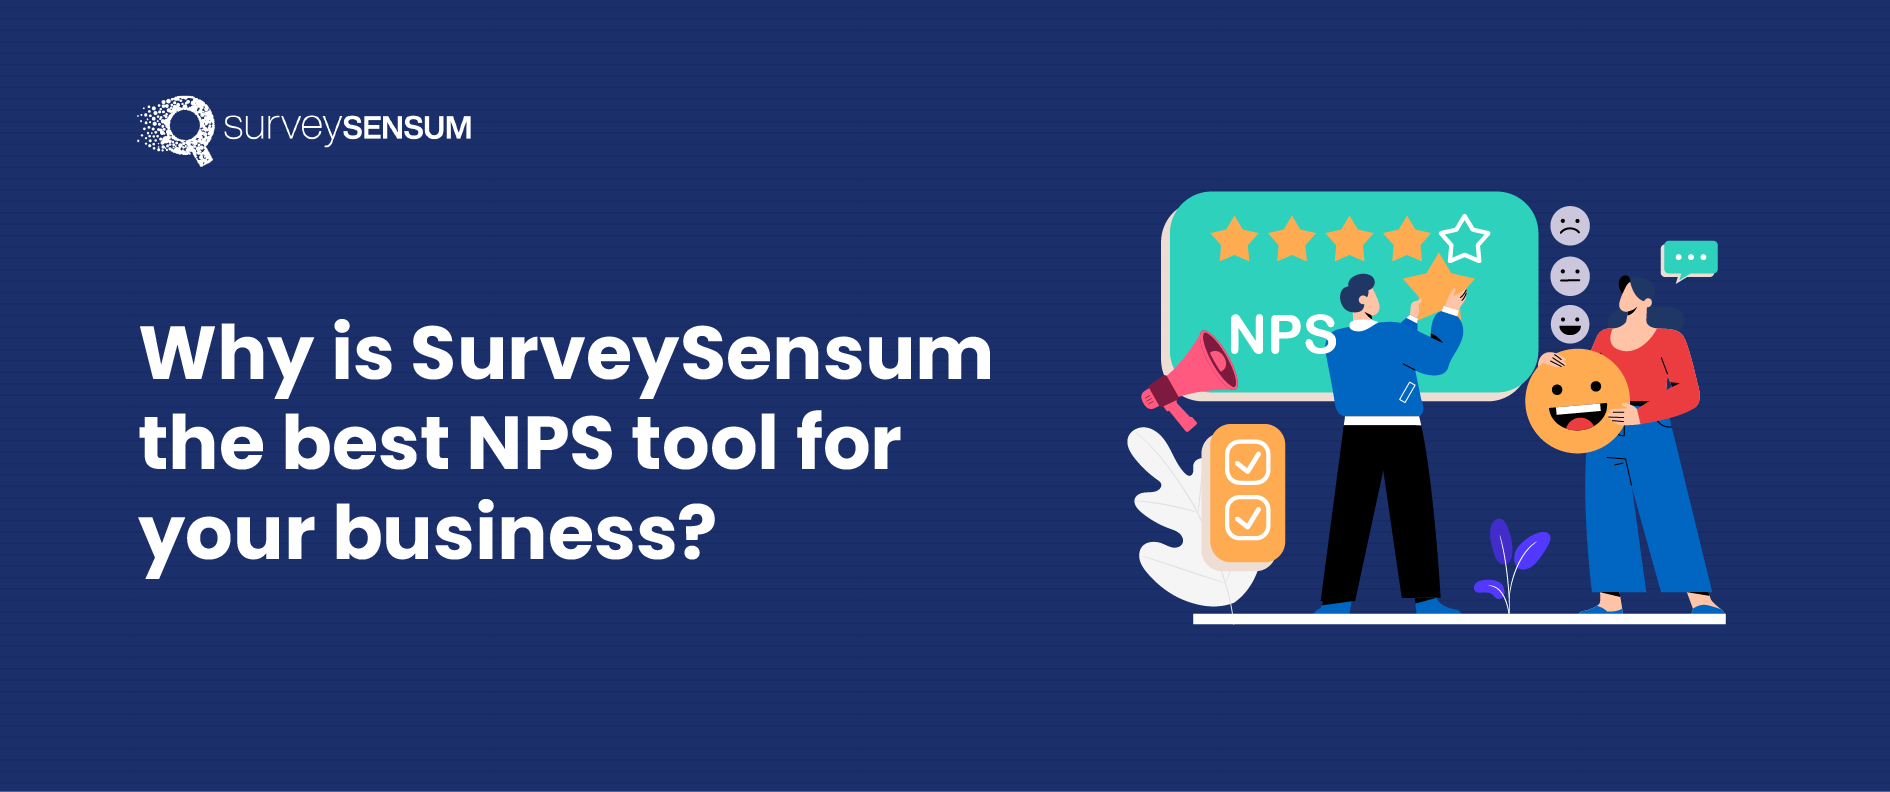 SurveySensum is the best NPS tool in the market